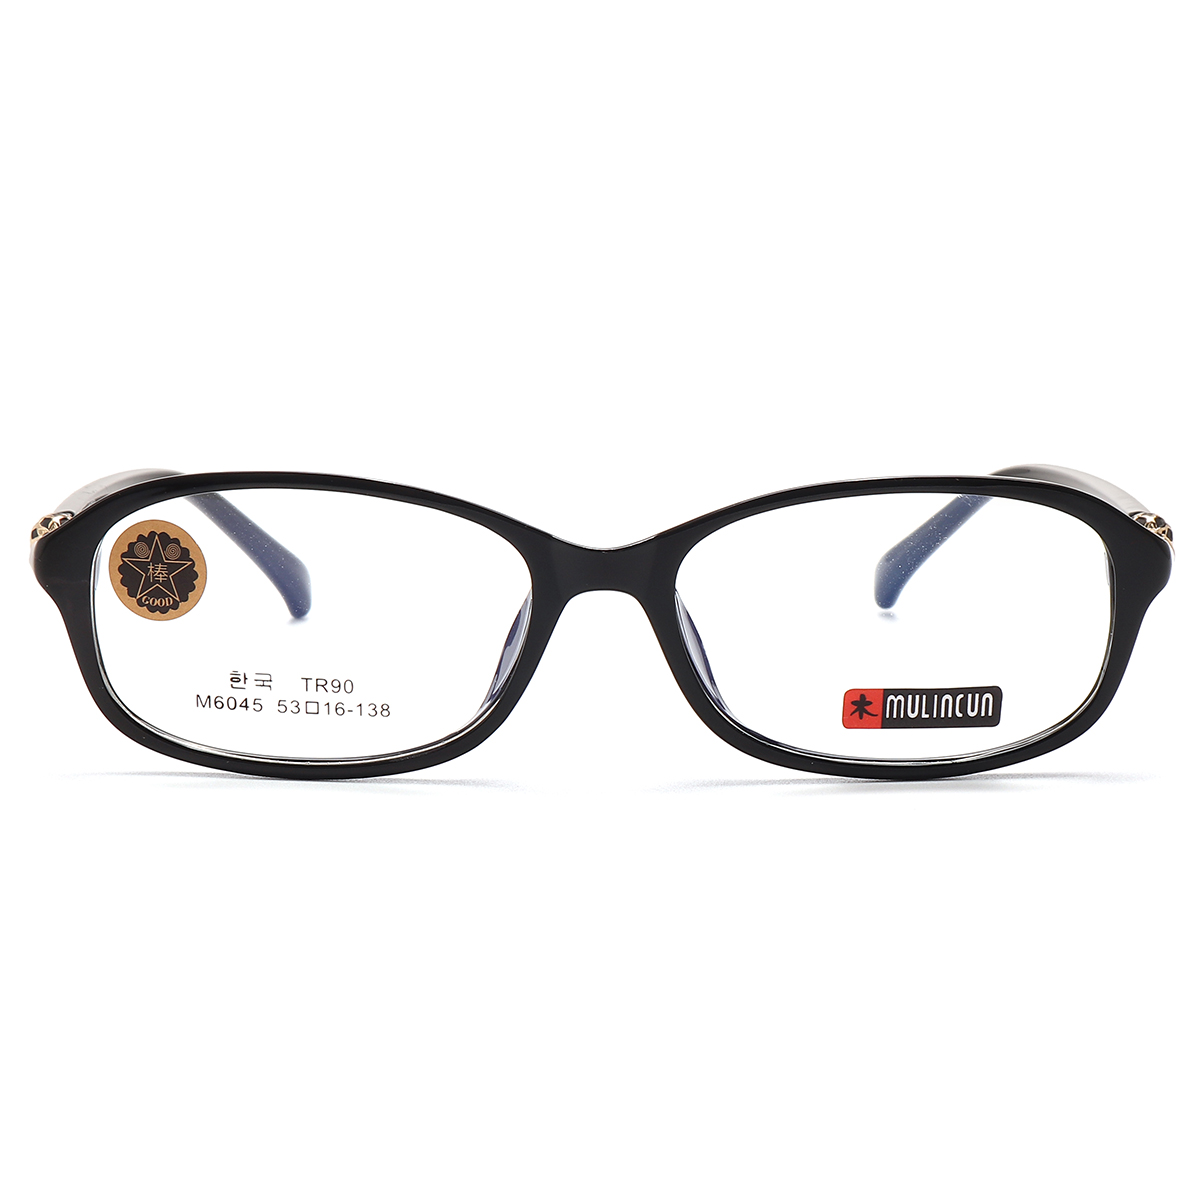 

KCASA TR90 Glasses Frame Great Toughness Light Weight